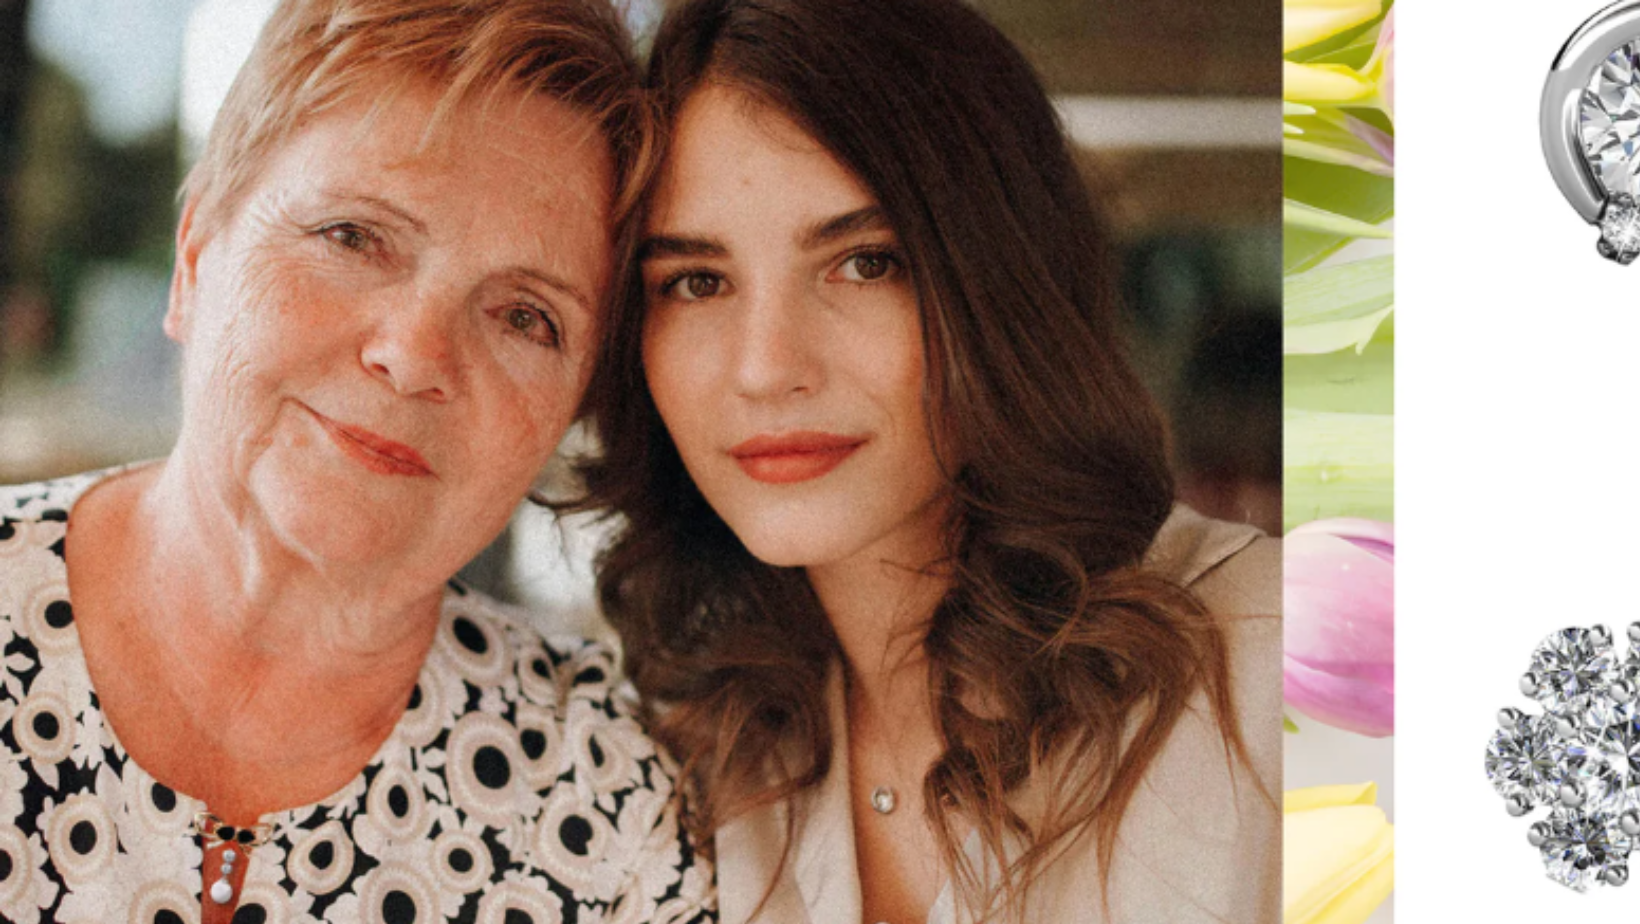 Cate & Chloe's Guide to Meaningful Mother's Day Gifts